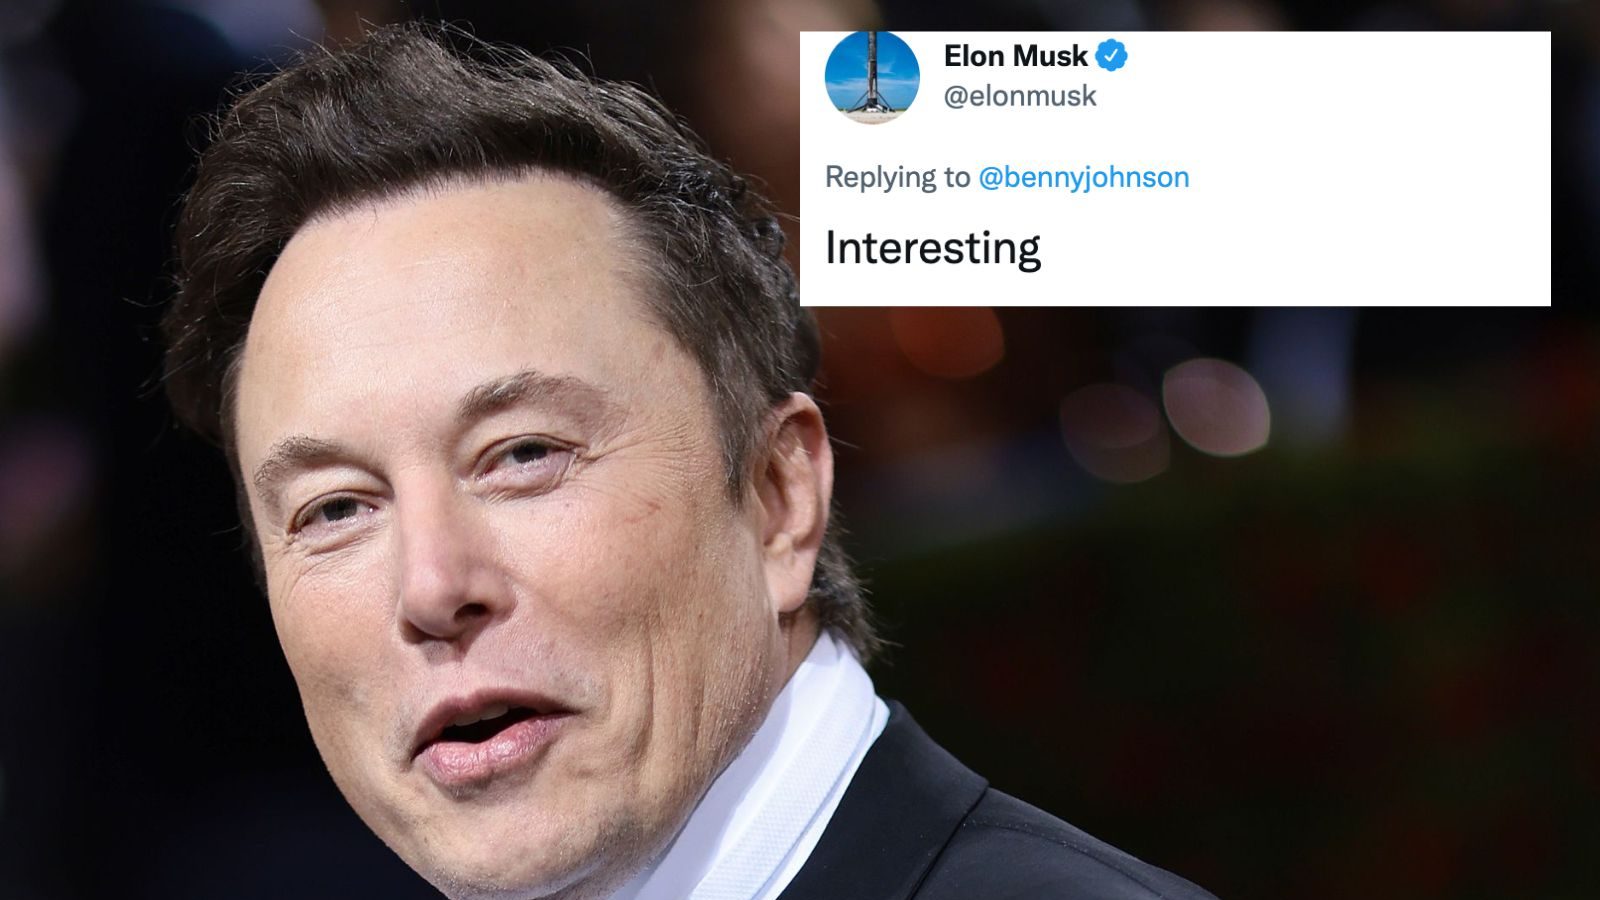 elon-musk-reacts-to-twitter-employees-talking-about-him-in-leaked-slack-messages